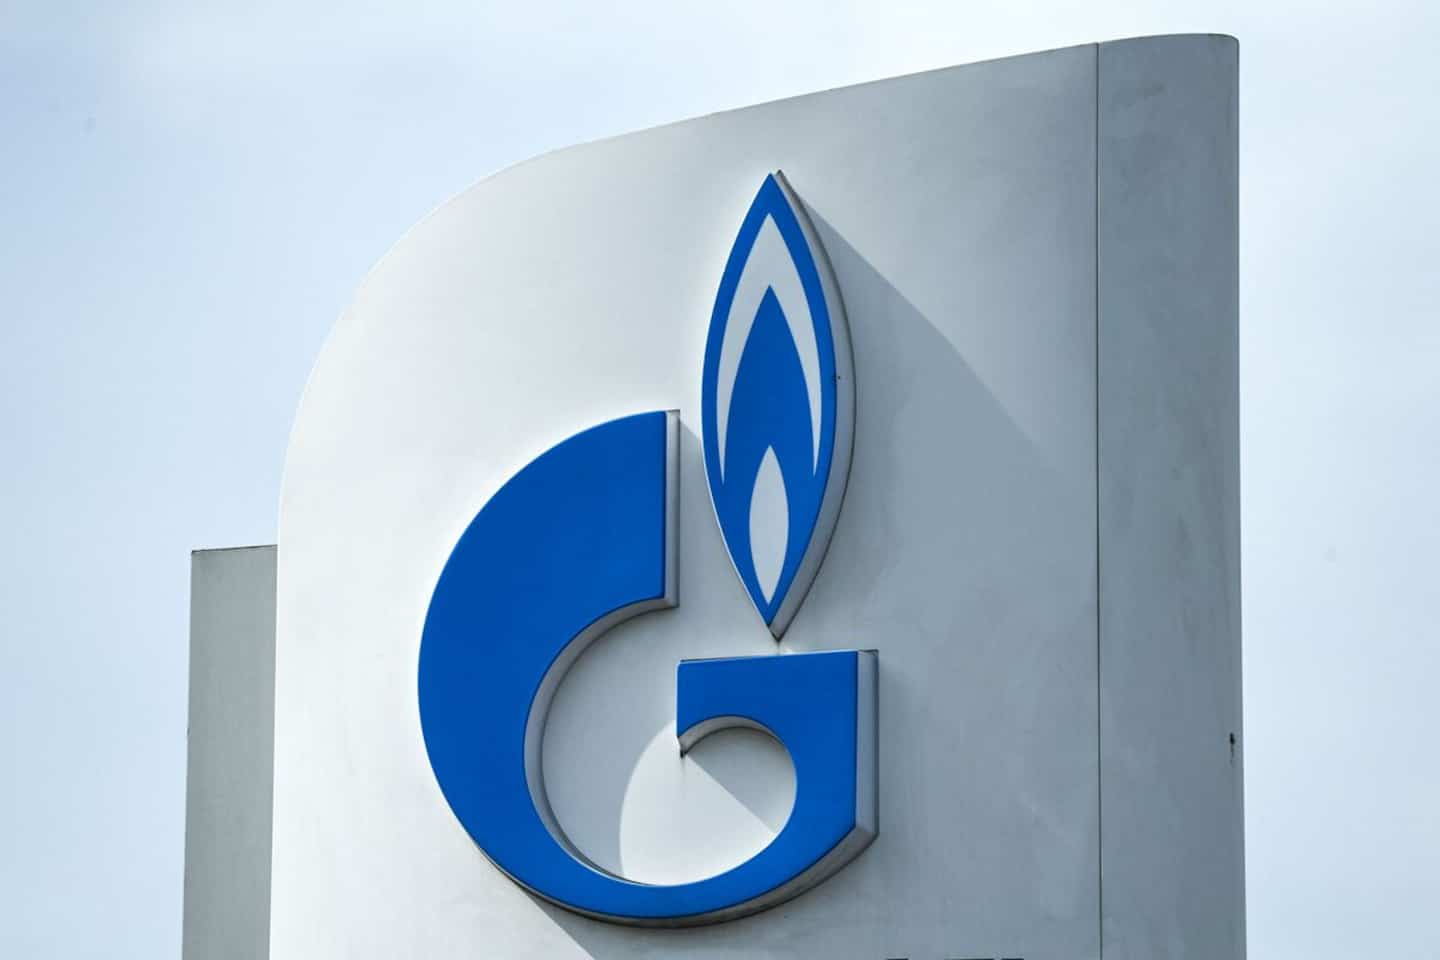 Russian giant Gazprom announces it has suspended gas deliveries to Latvia